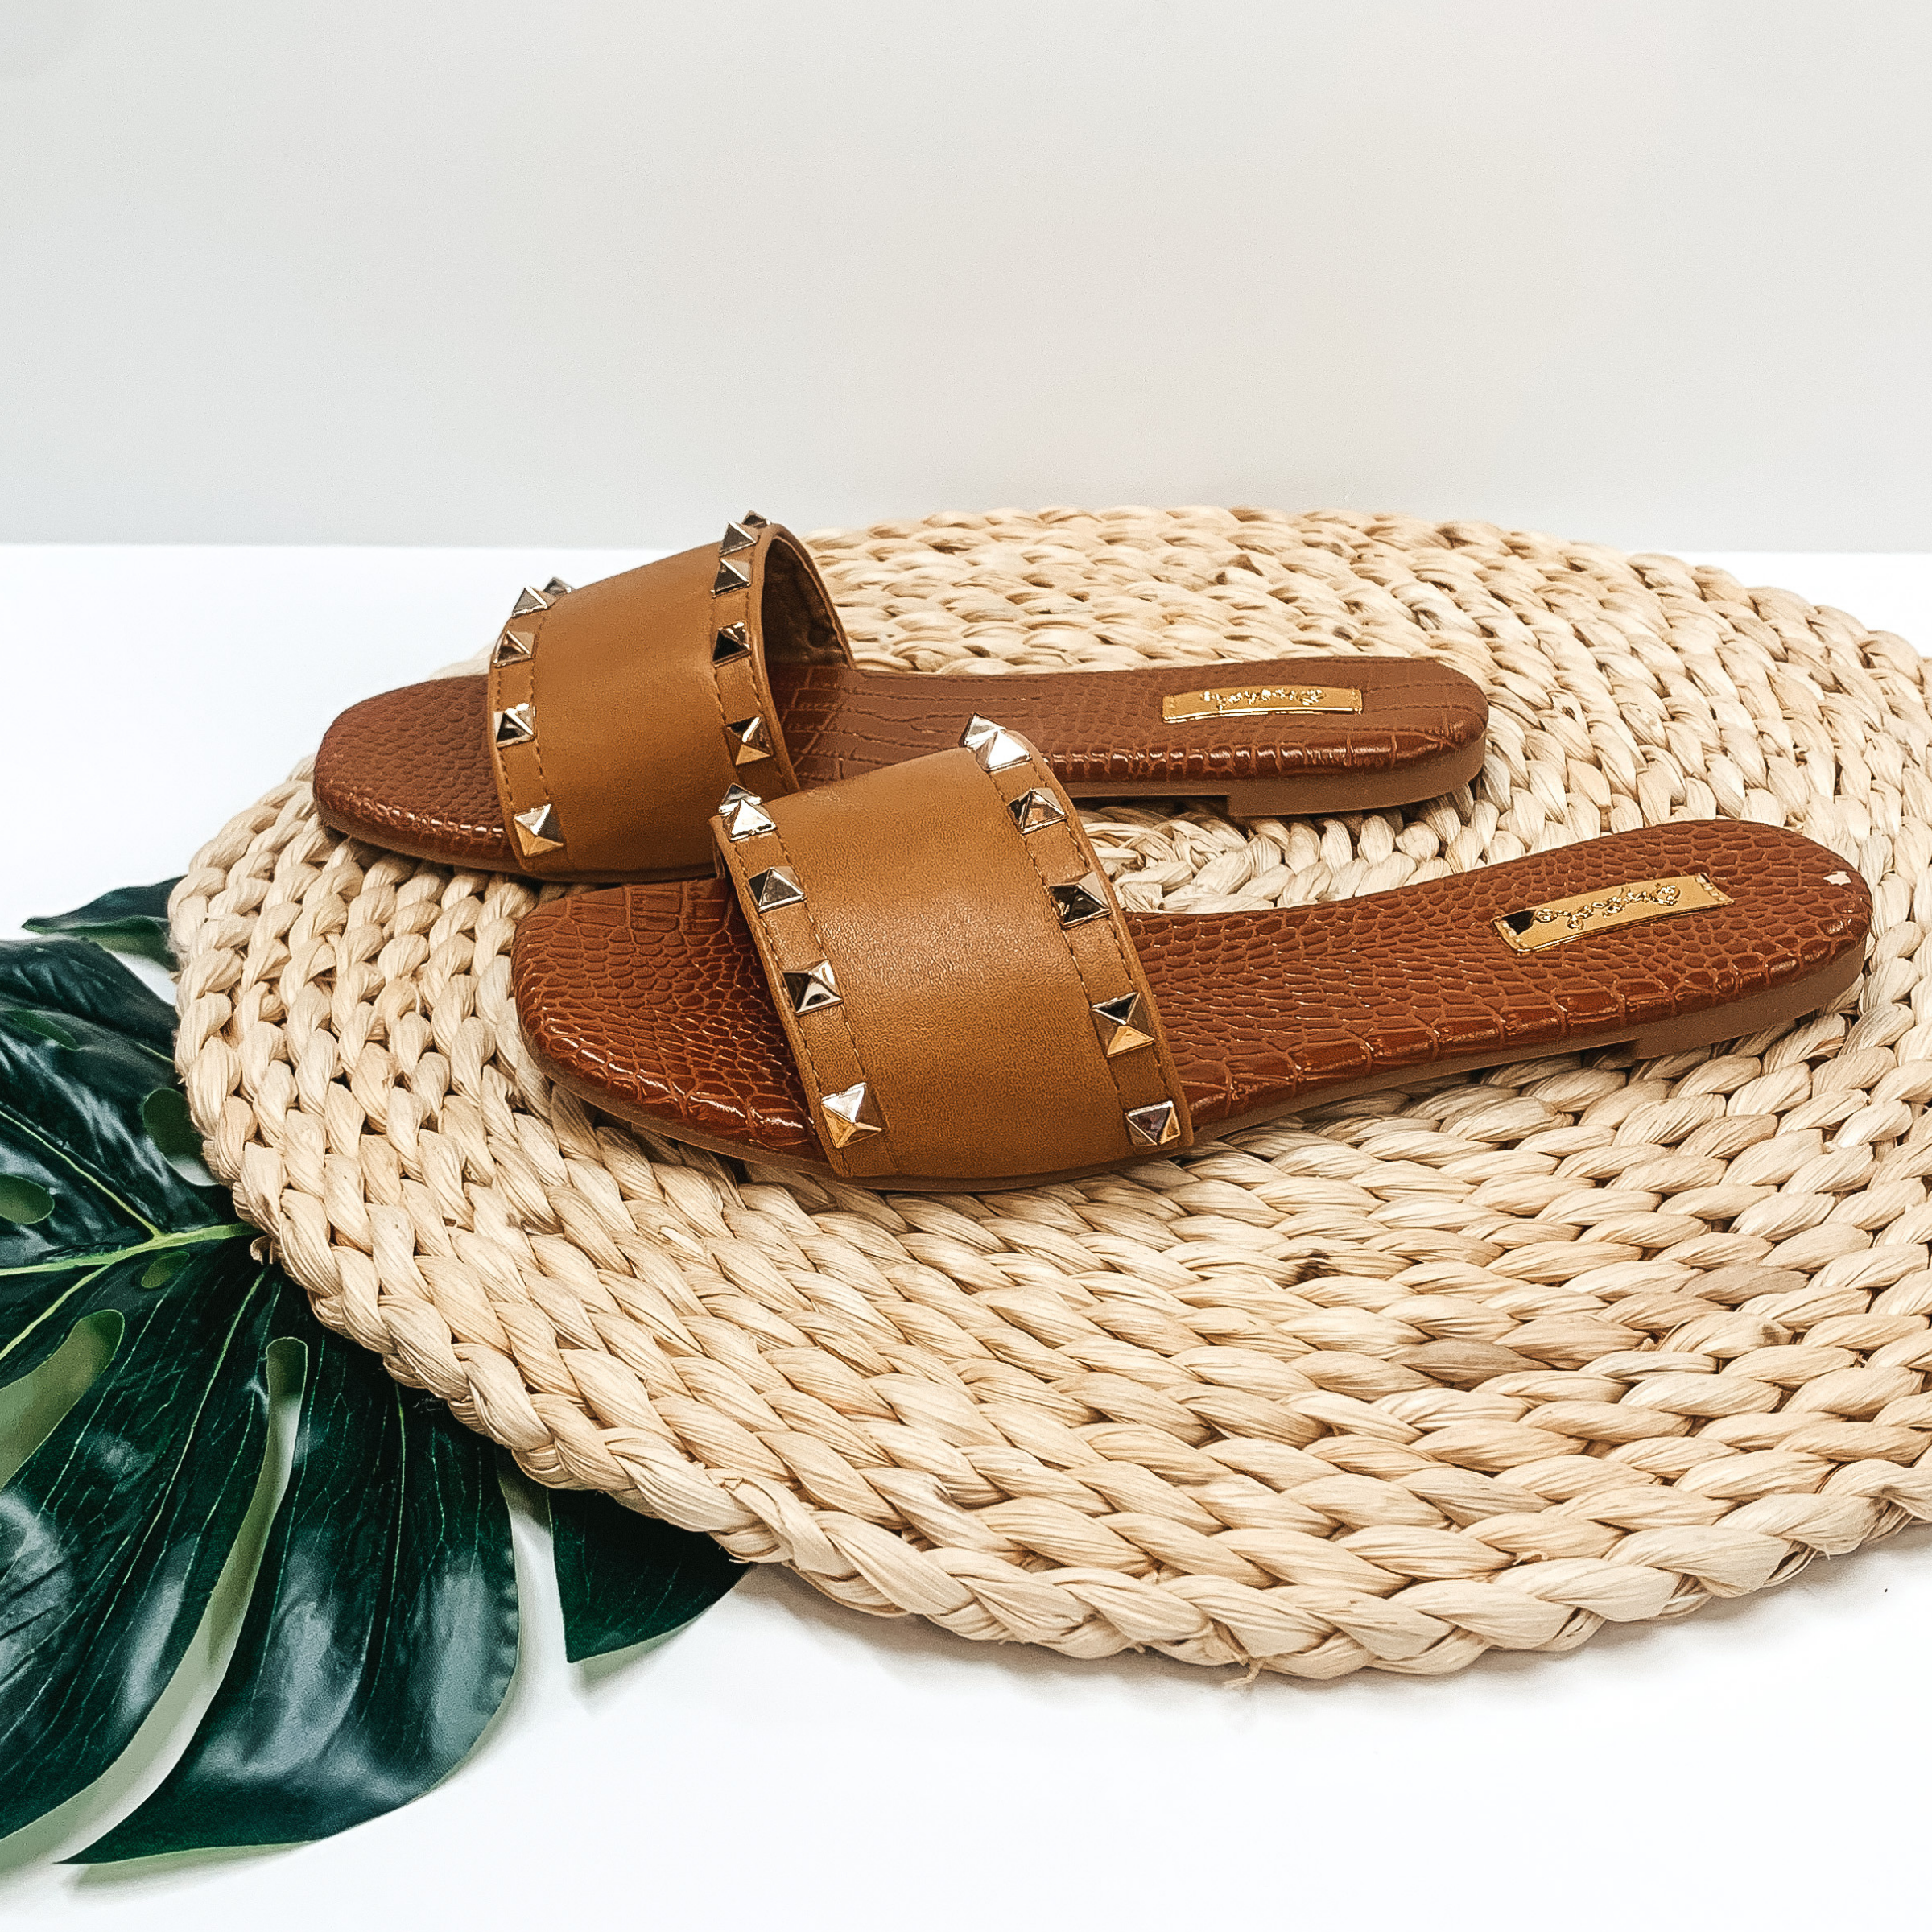 Chic Steps Gold Studded Slide On Sandals with Croc Print Sole in Tan - Giddy Up Glamour Boutique